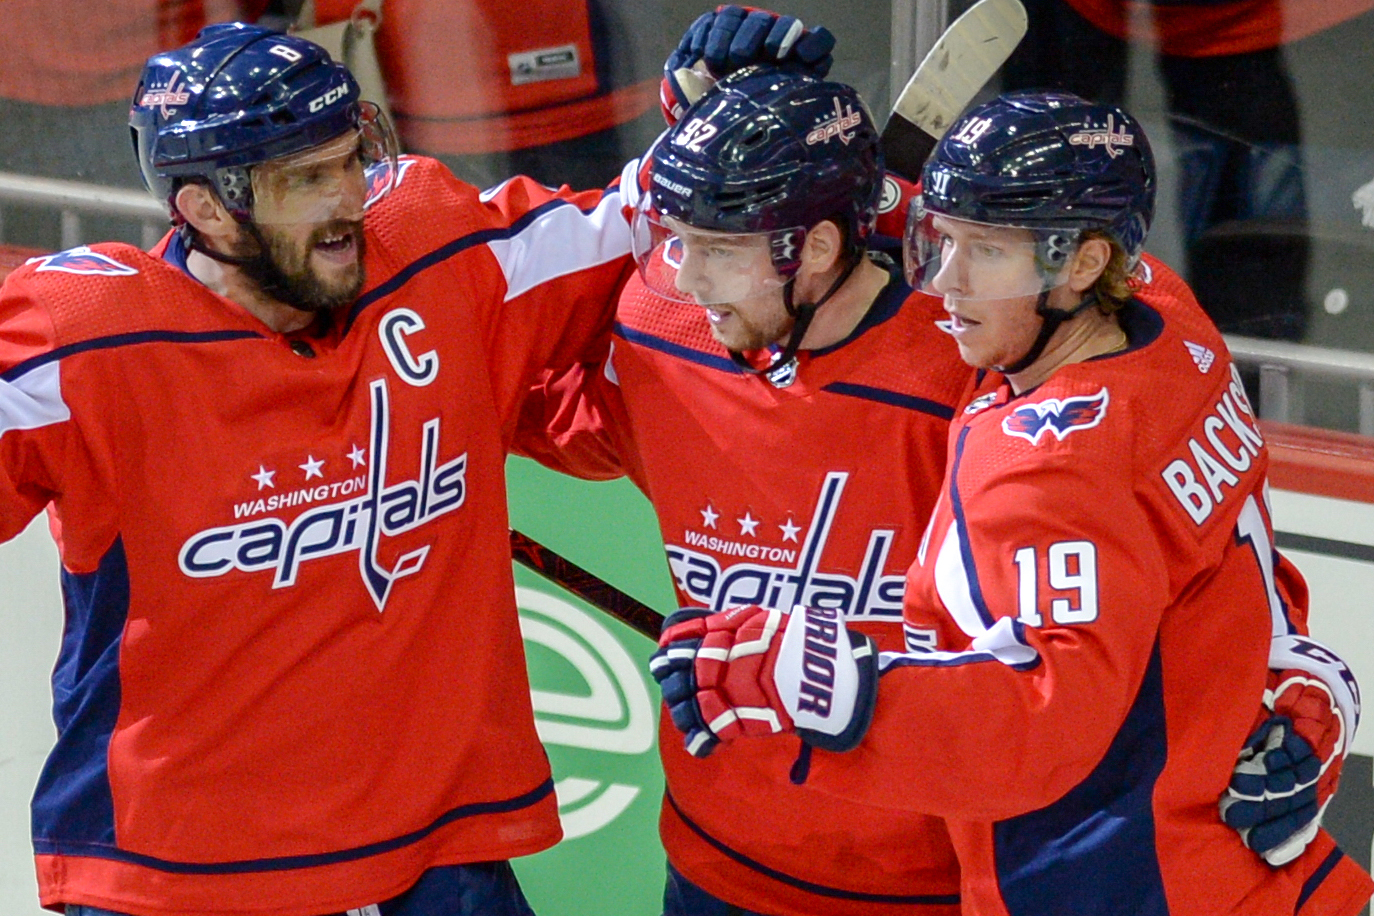 The Washington Capitals seem to be sticking with pretty much the same group for next season.